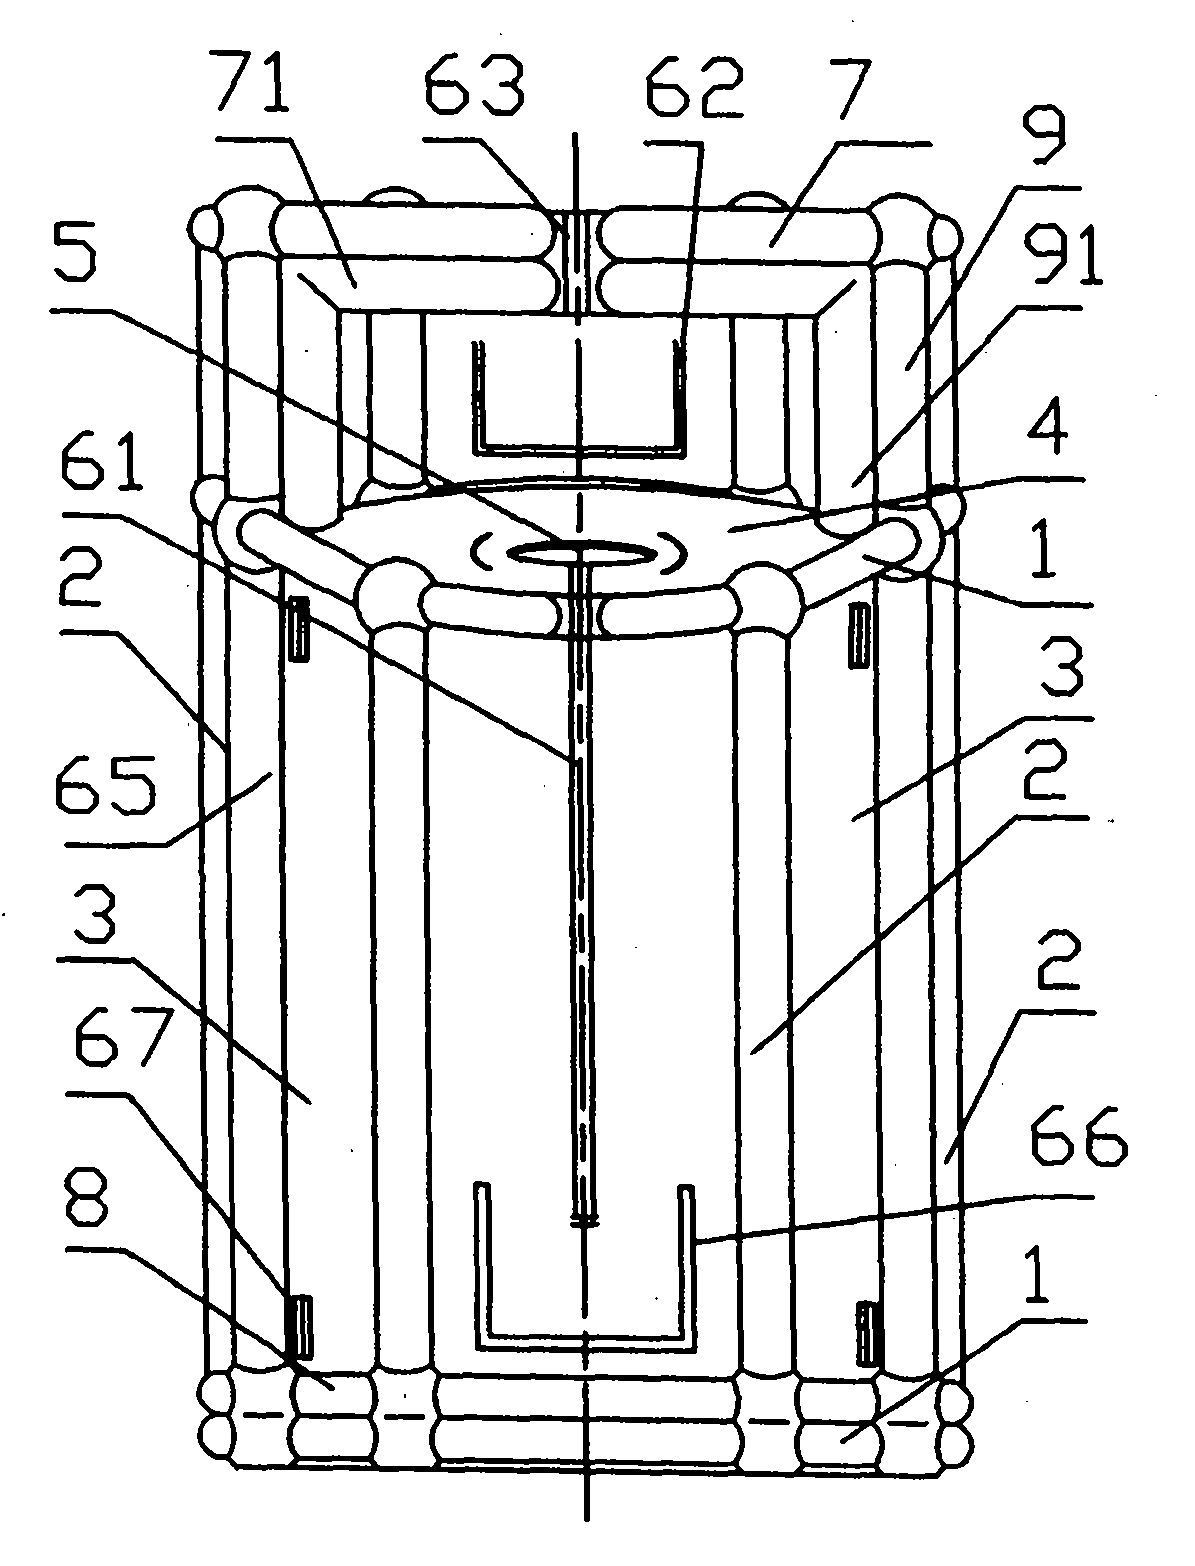 Air-inflation seat-type shower box